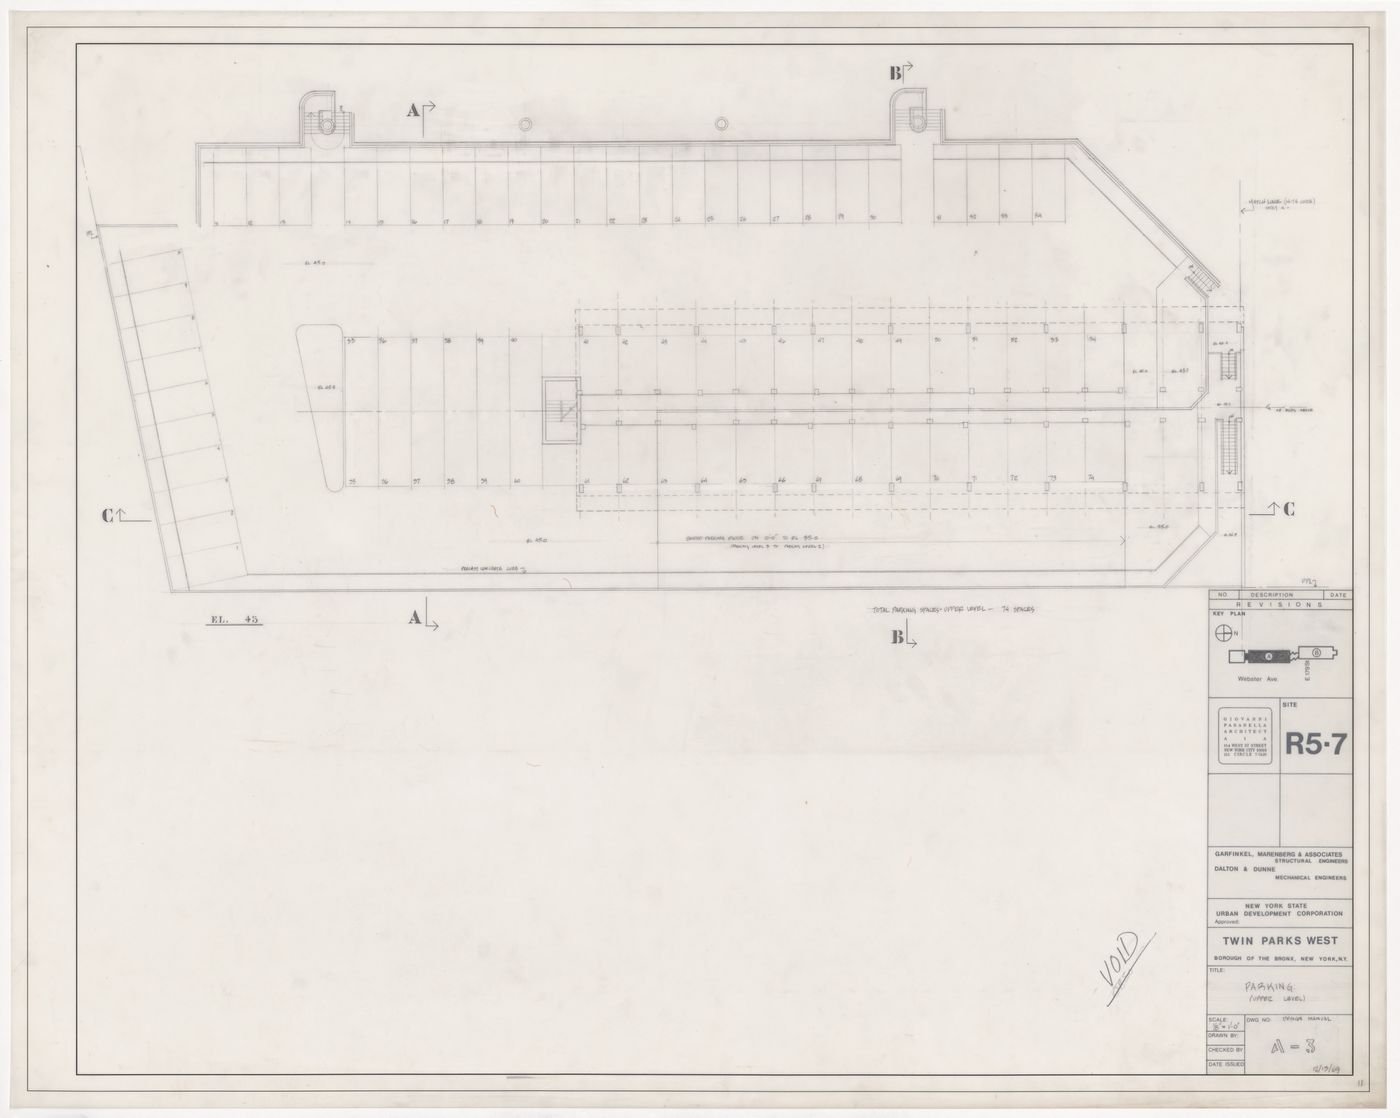 Parking plan for Twin Parks West, Site R5-7, Bronx, New York